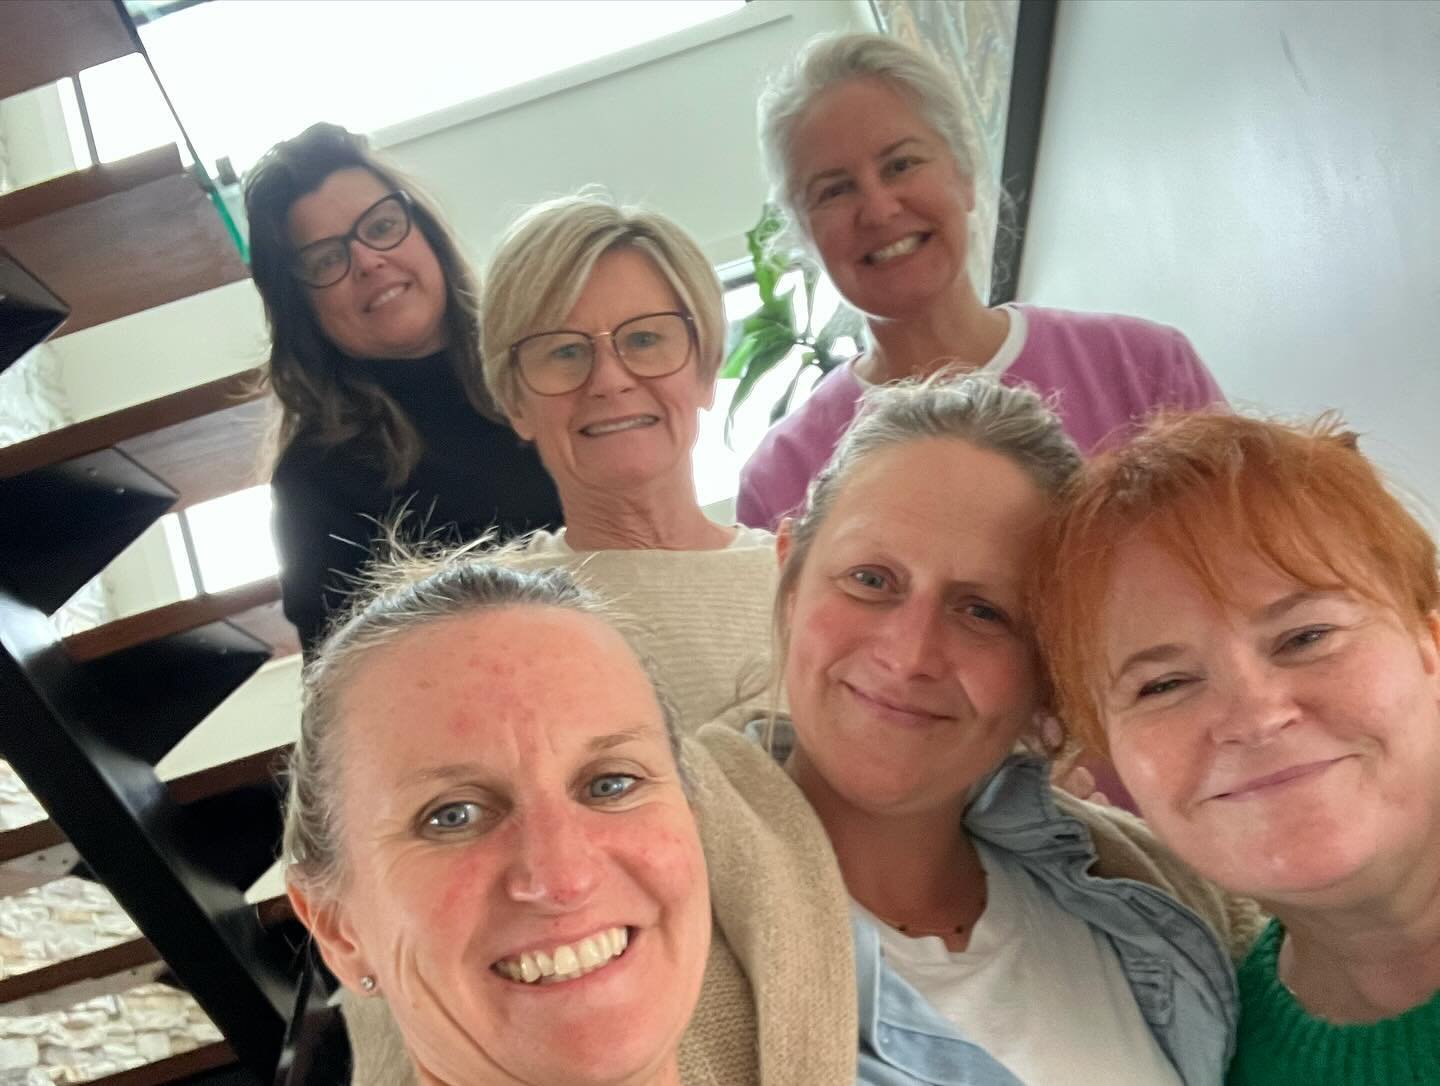 What a weekend!! I&rsquo;ve just returned from two glorious days in Torquay hosting my first SoulFULL Girls Getaway. 

We moved our bodies, relaxed, nourished, nurtured and connected, with each other, with nature and more importantly with ourselves.
